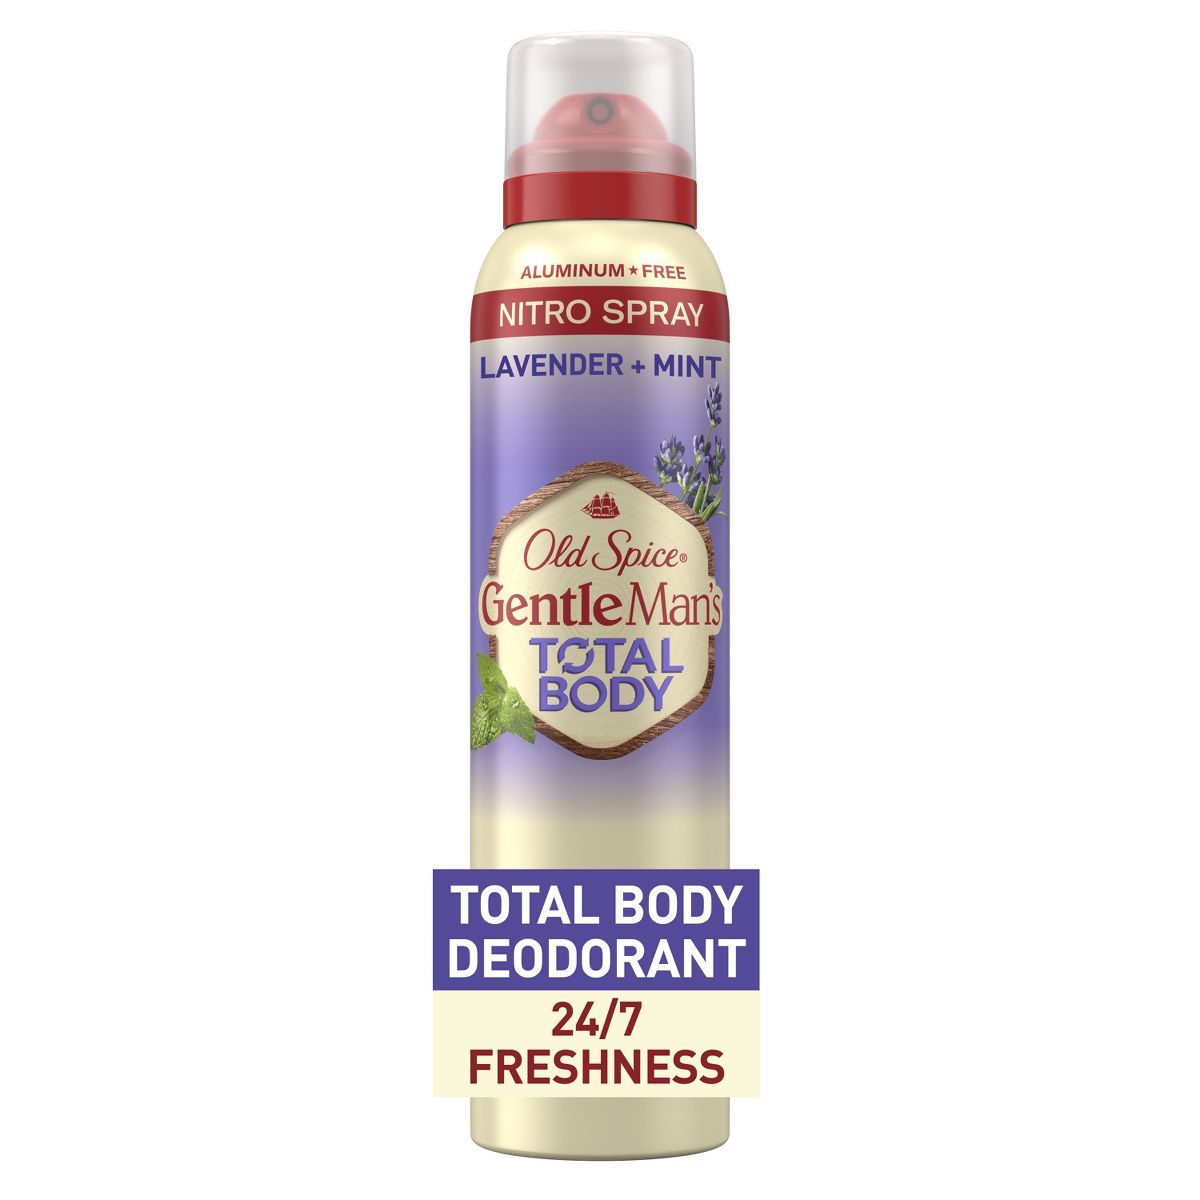 Old Spice Whole Body Deodorant for Men - Total Body Aluminum Free Spray - Lavender & Mint - 3.5oz | Target